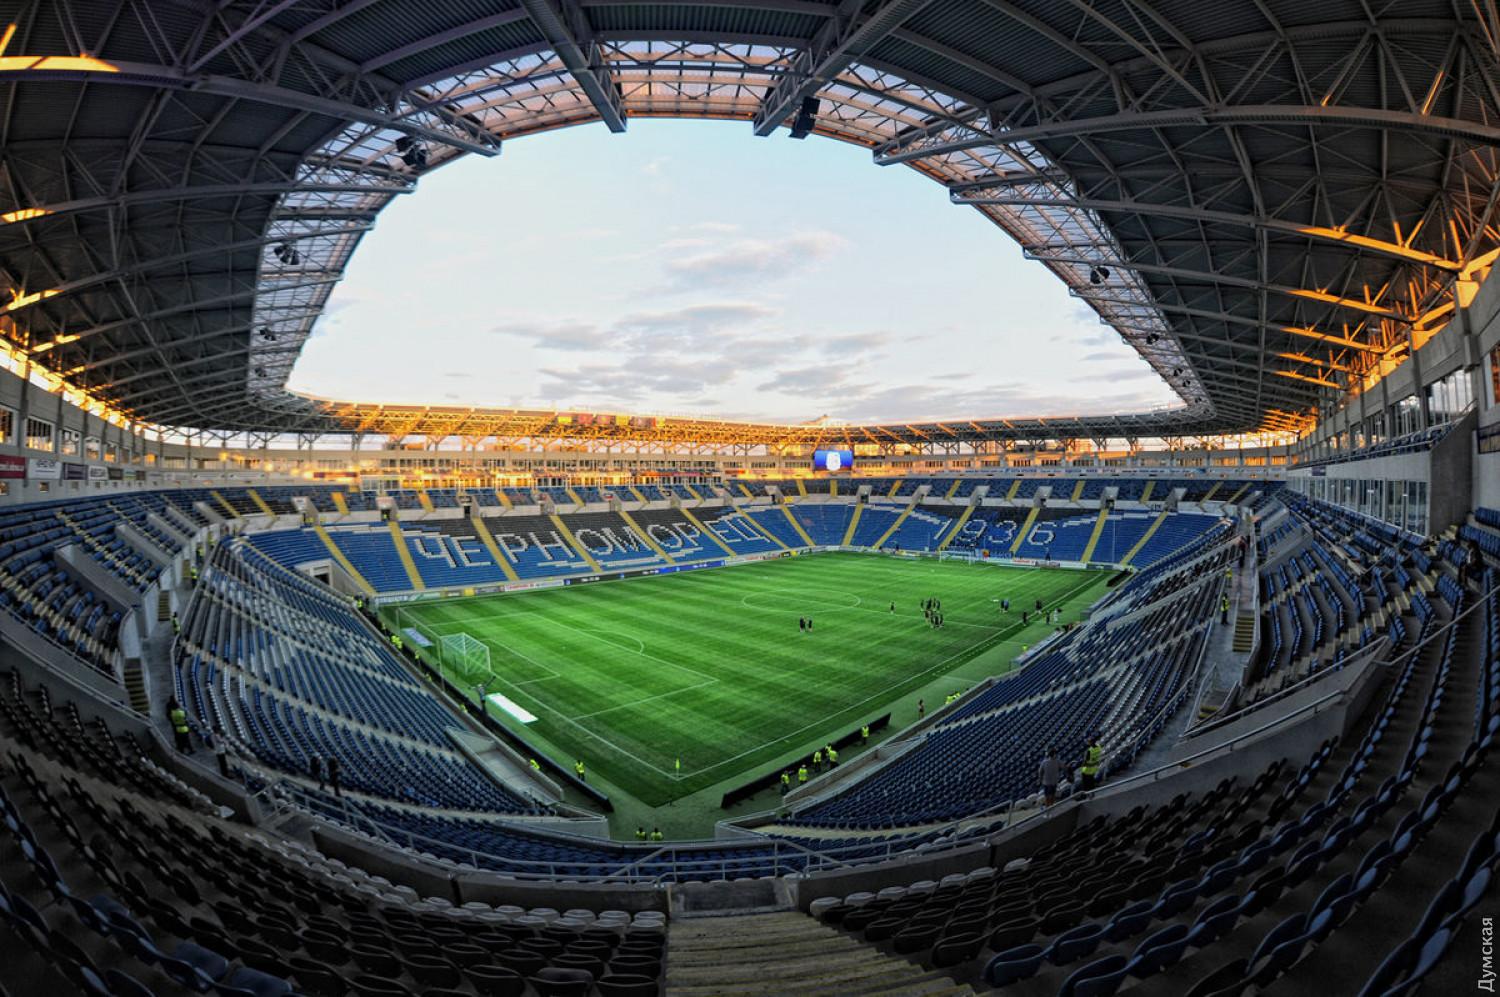 Odessa stadium "Chernomorets" was sold to a company in California